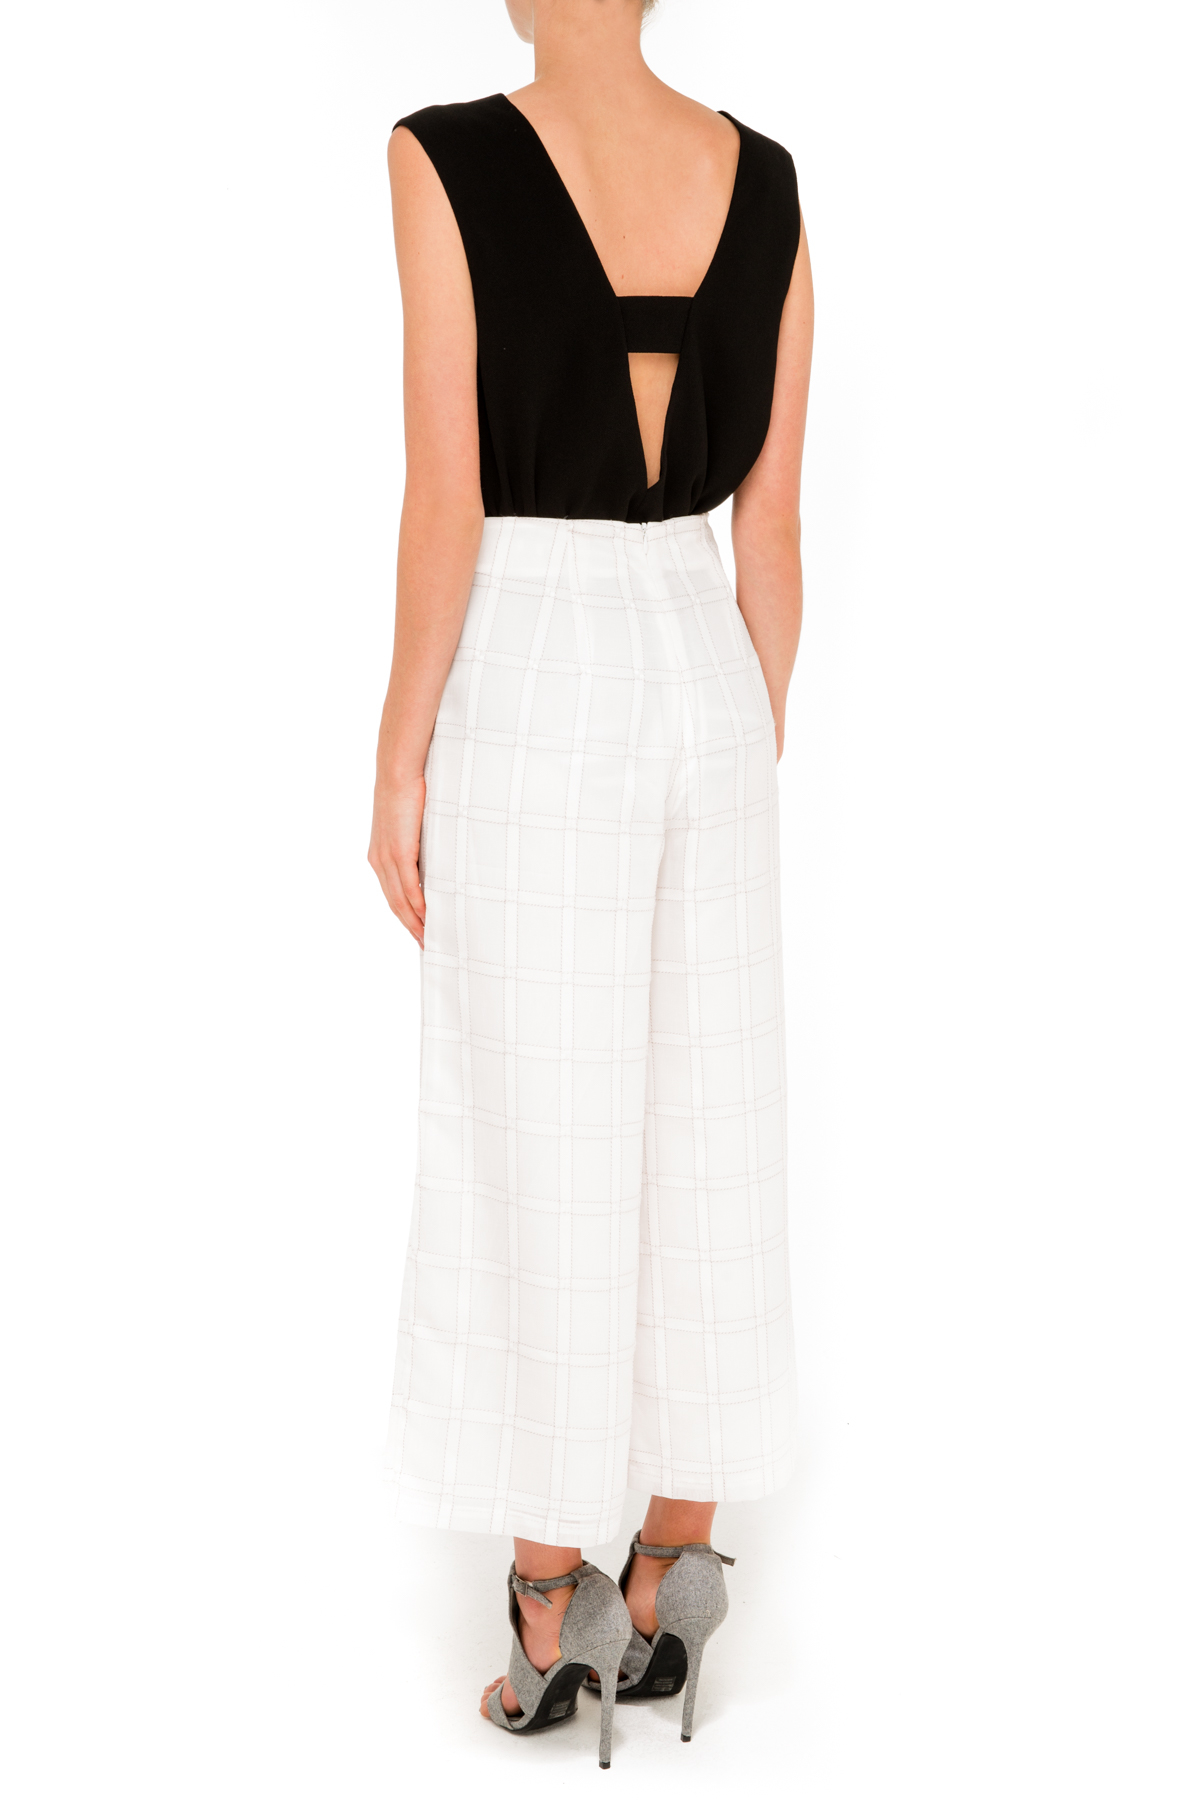 Finders keepers Hear Me Culottes in White (sheer lattice) | Lyst  